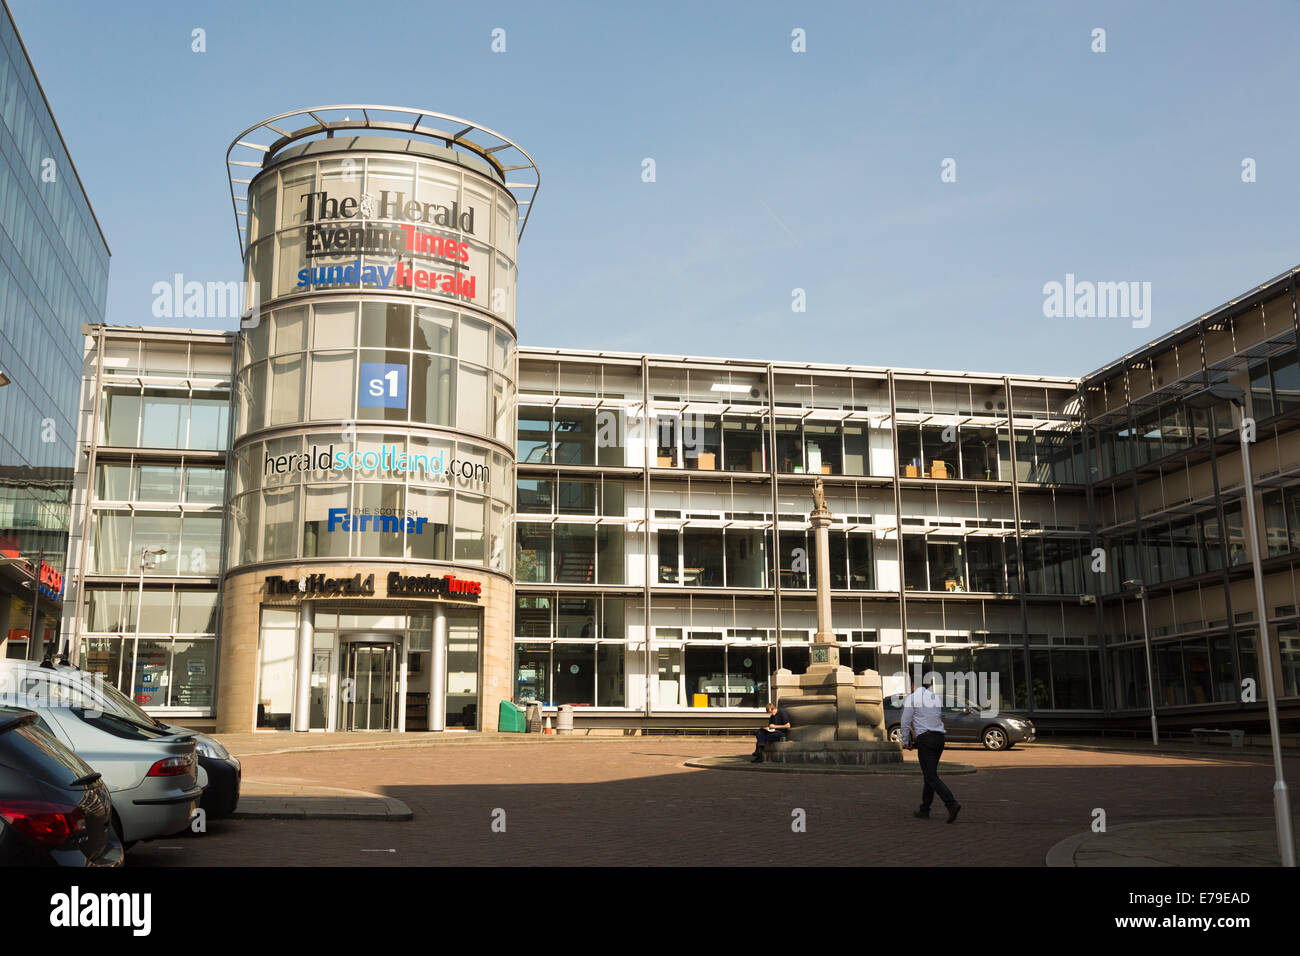 The Herald, Evening Times, Sunday Herald, s1 and Herald Scotland main office building in Glasgow, Scotland. Stock Photo